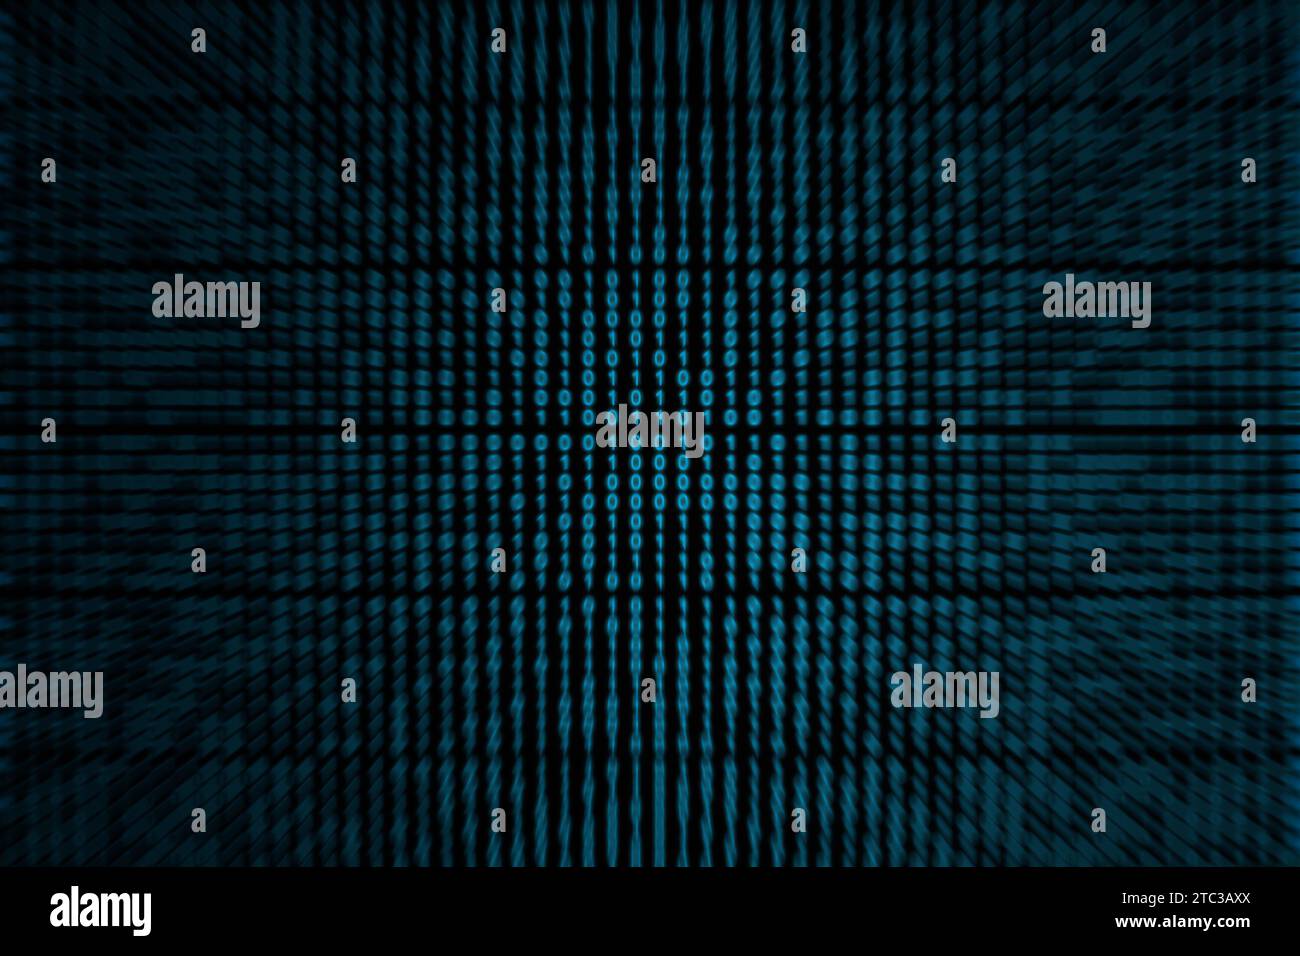 Zoom in on a blue binary code background. Stock Photo